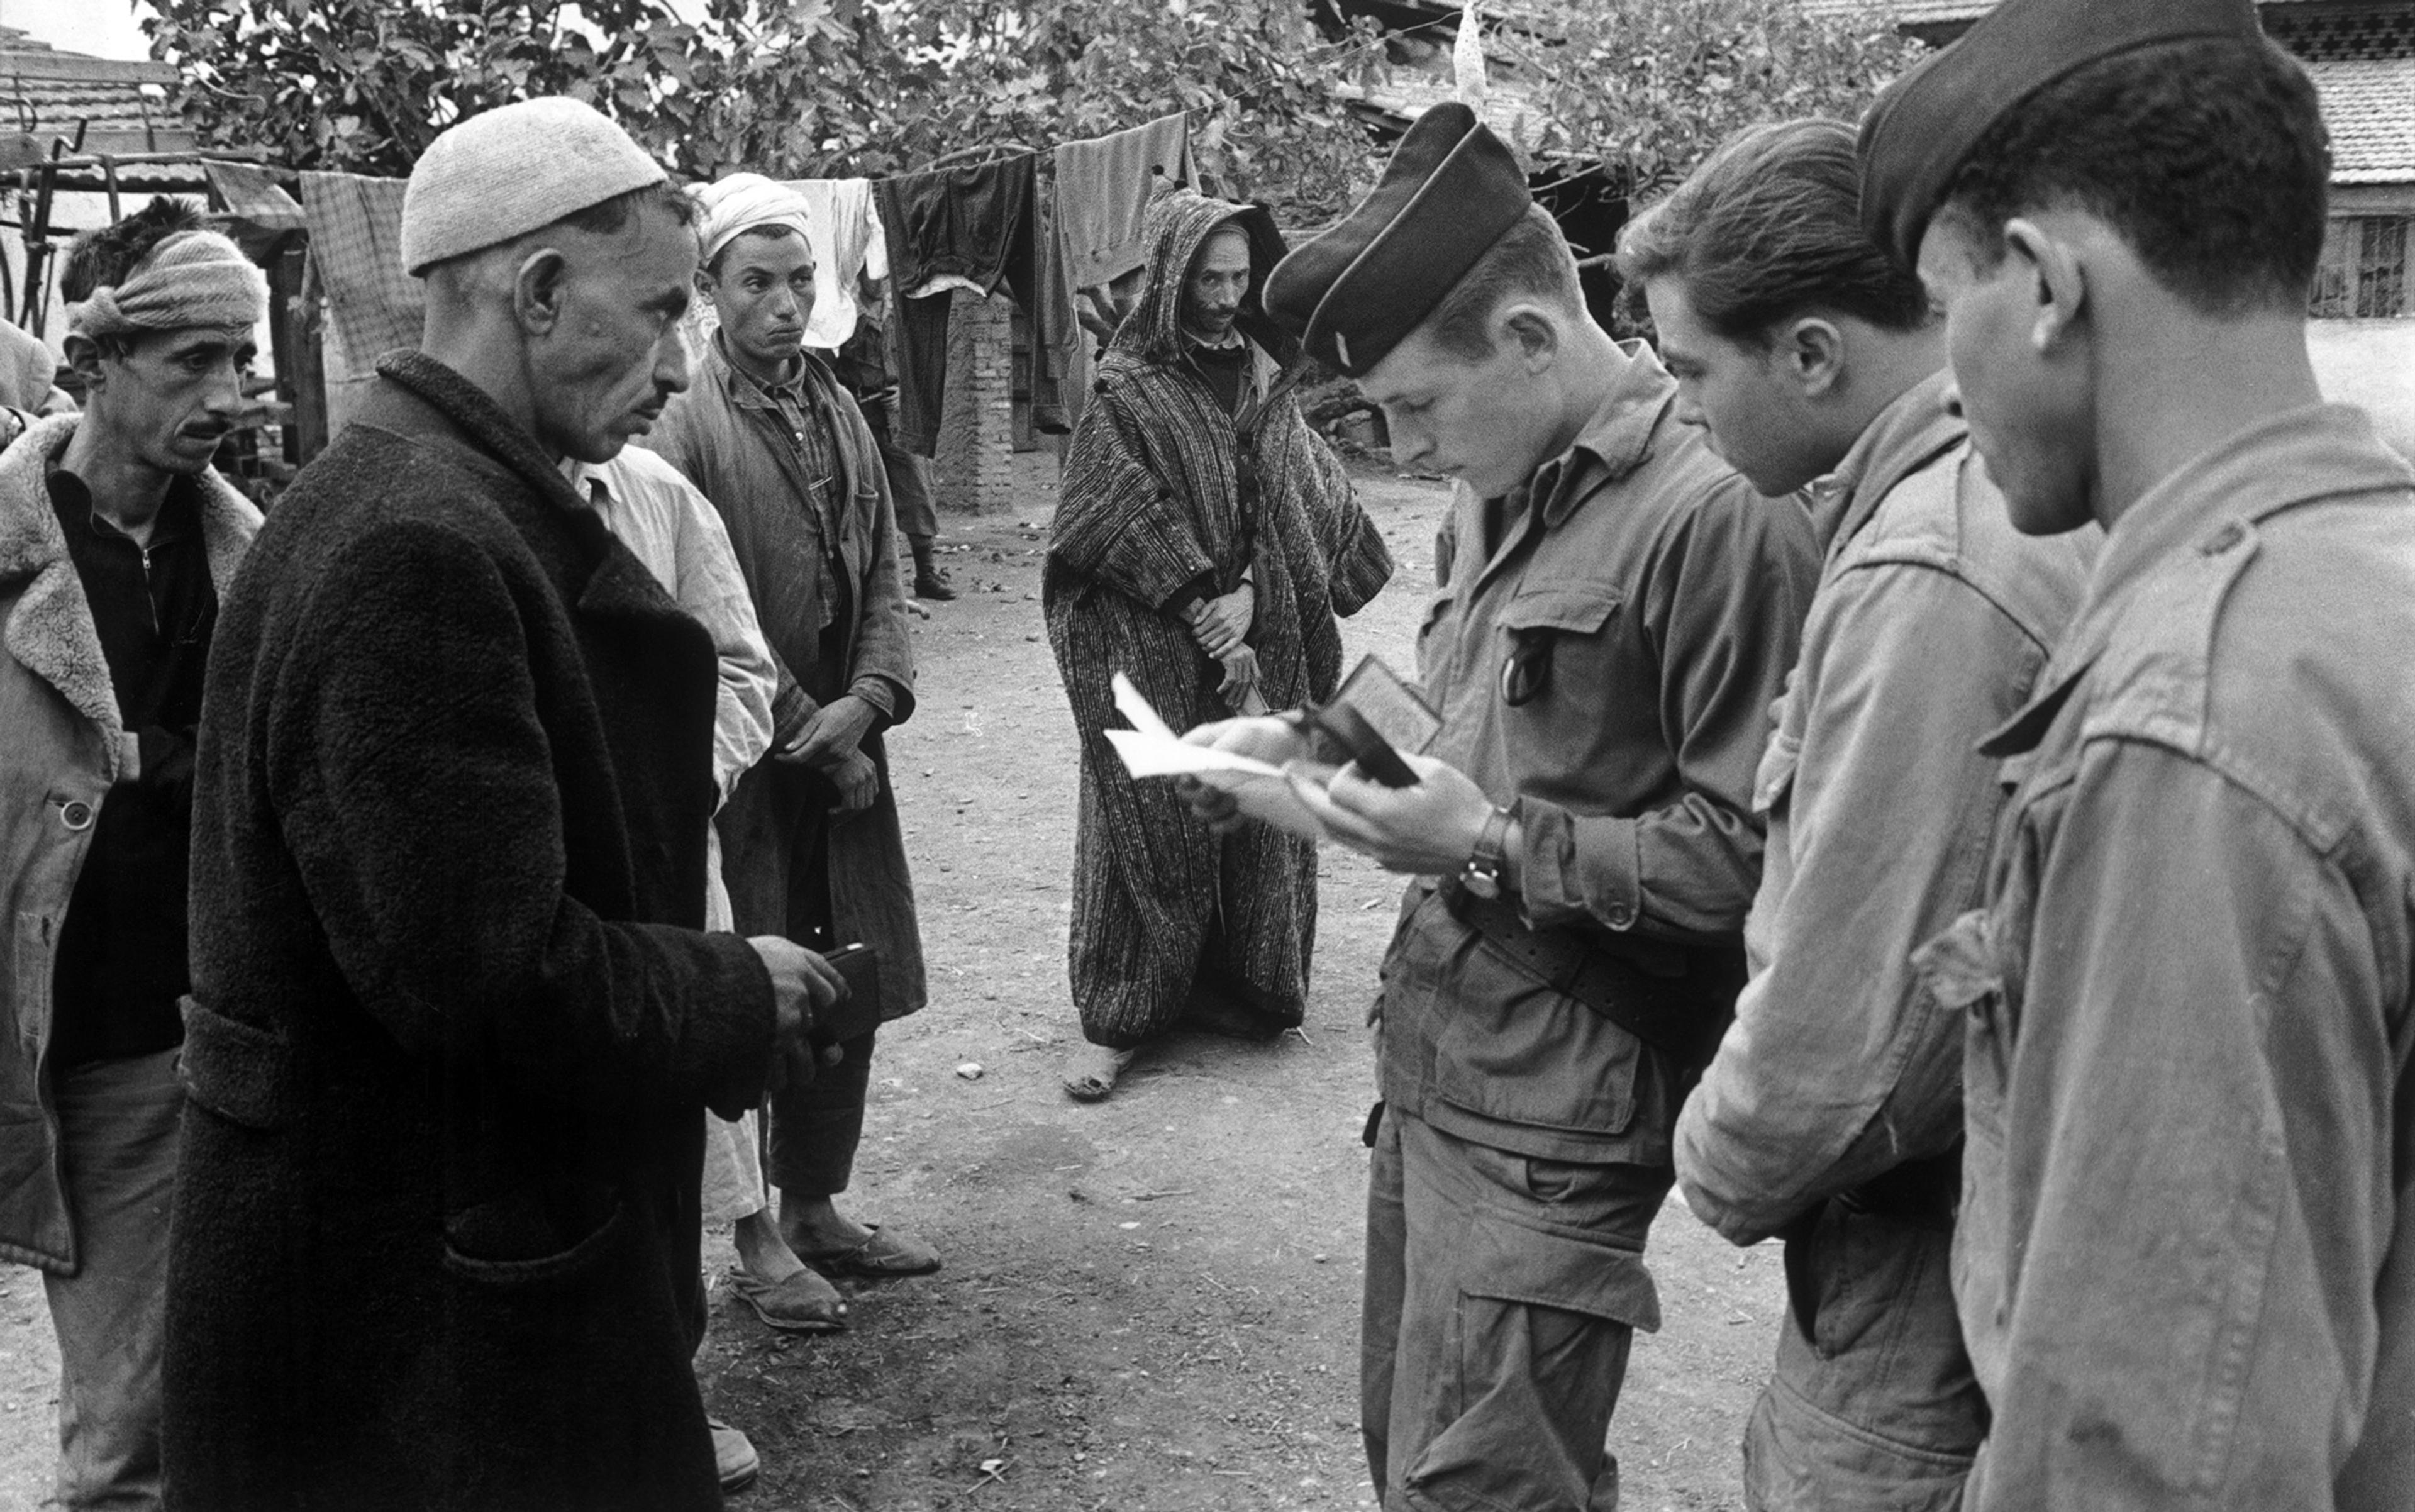 A black-and-white photo of soldiers in uniform checking documents of several men standing outdoors, with laundry hanging in the background.